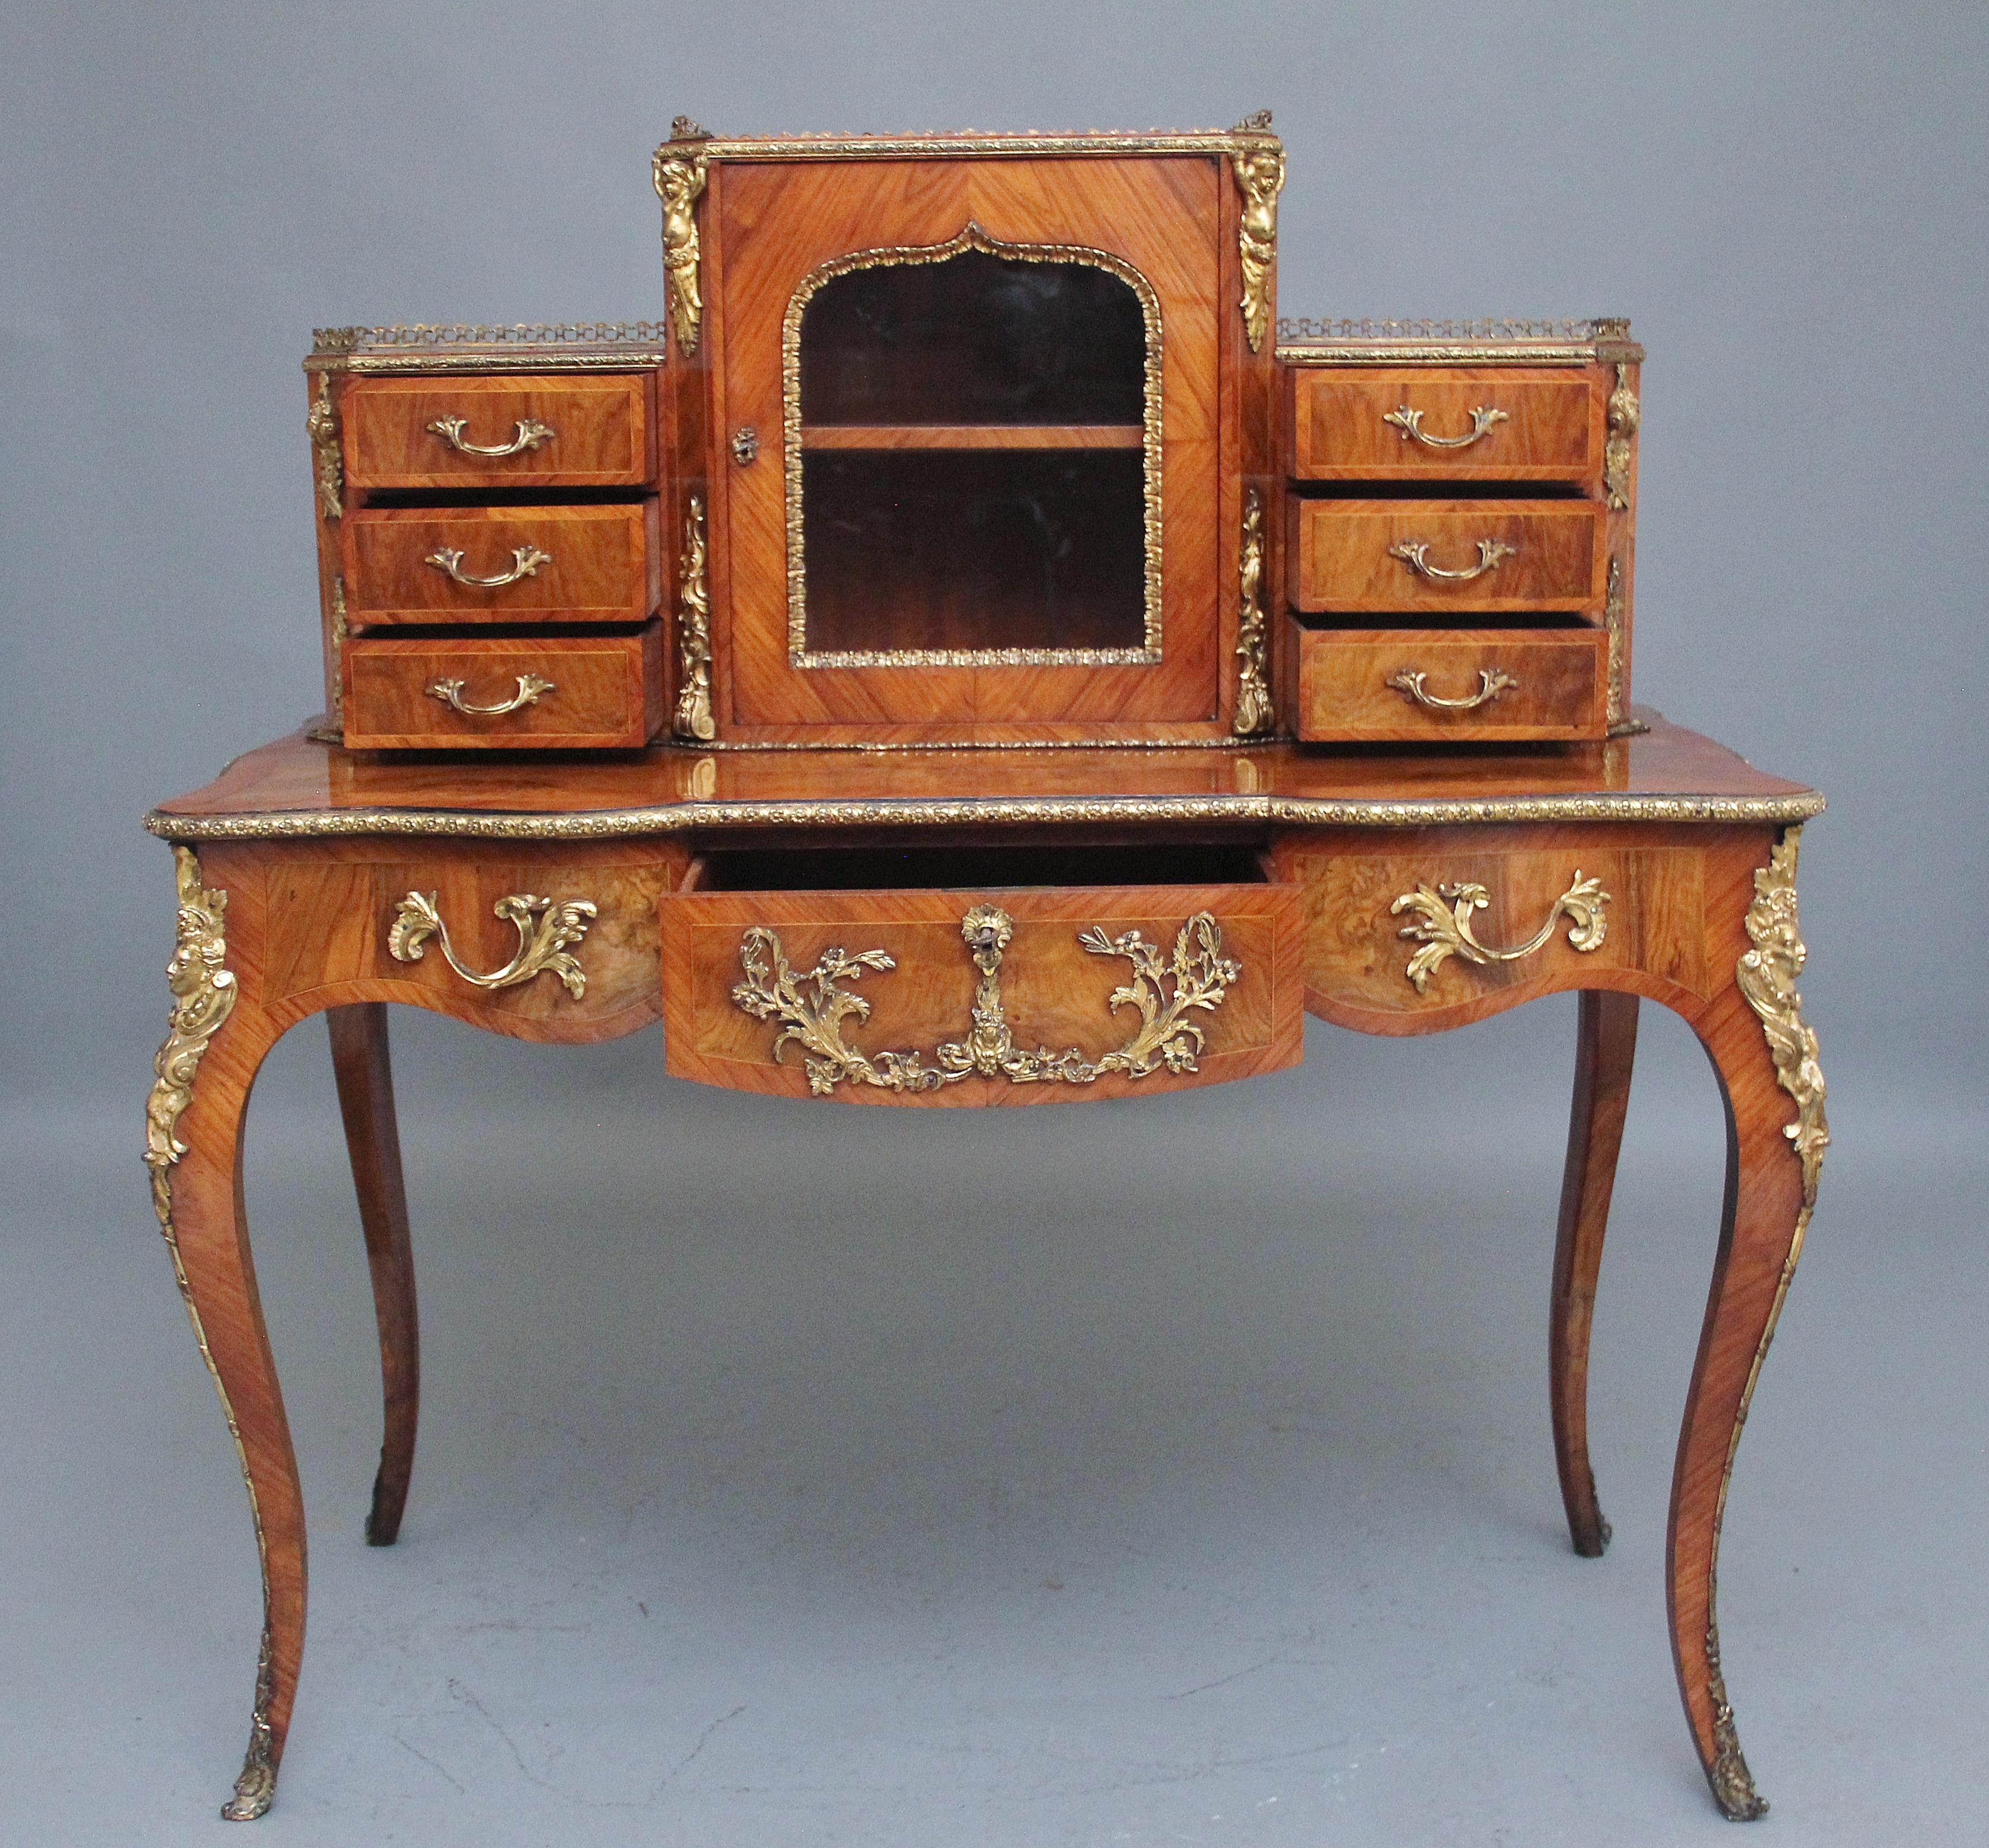 An exhibition quality 19th Century walnut Bonheur Du Jour / desk by Gillows, the top having a brass gallery running along all three sections, a cupboard at the centre with a glazed door opening to reveal a single shelf inside, lovely ormolu beading